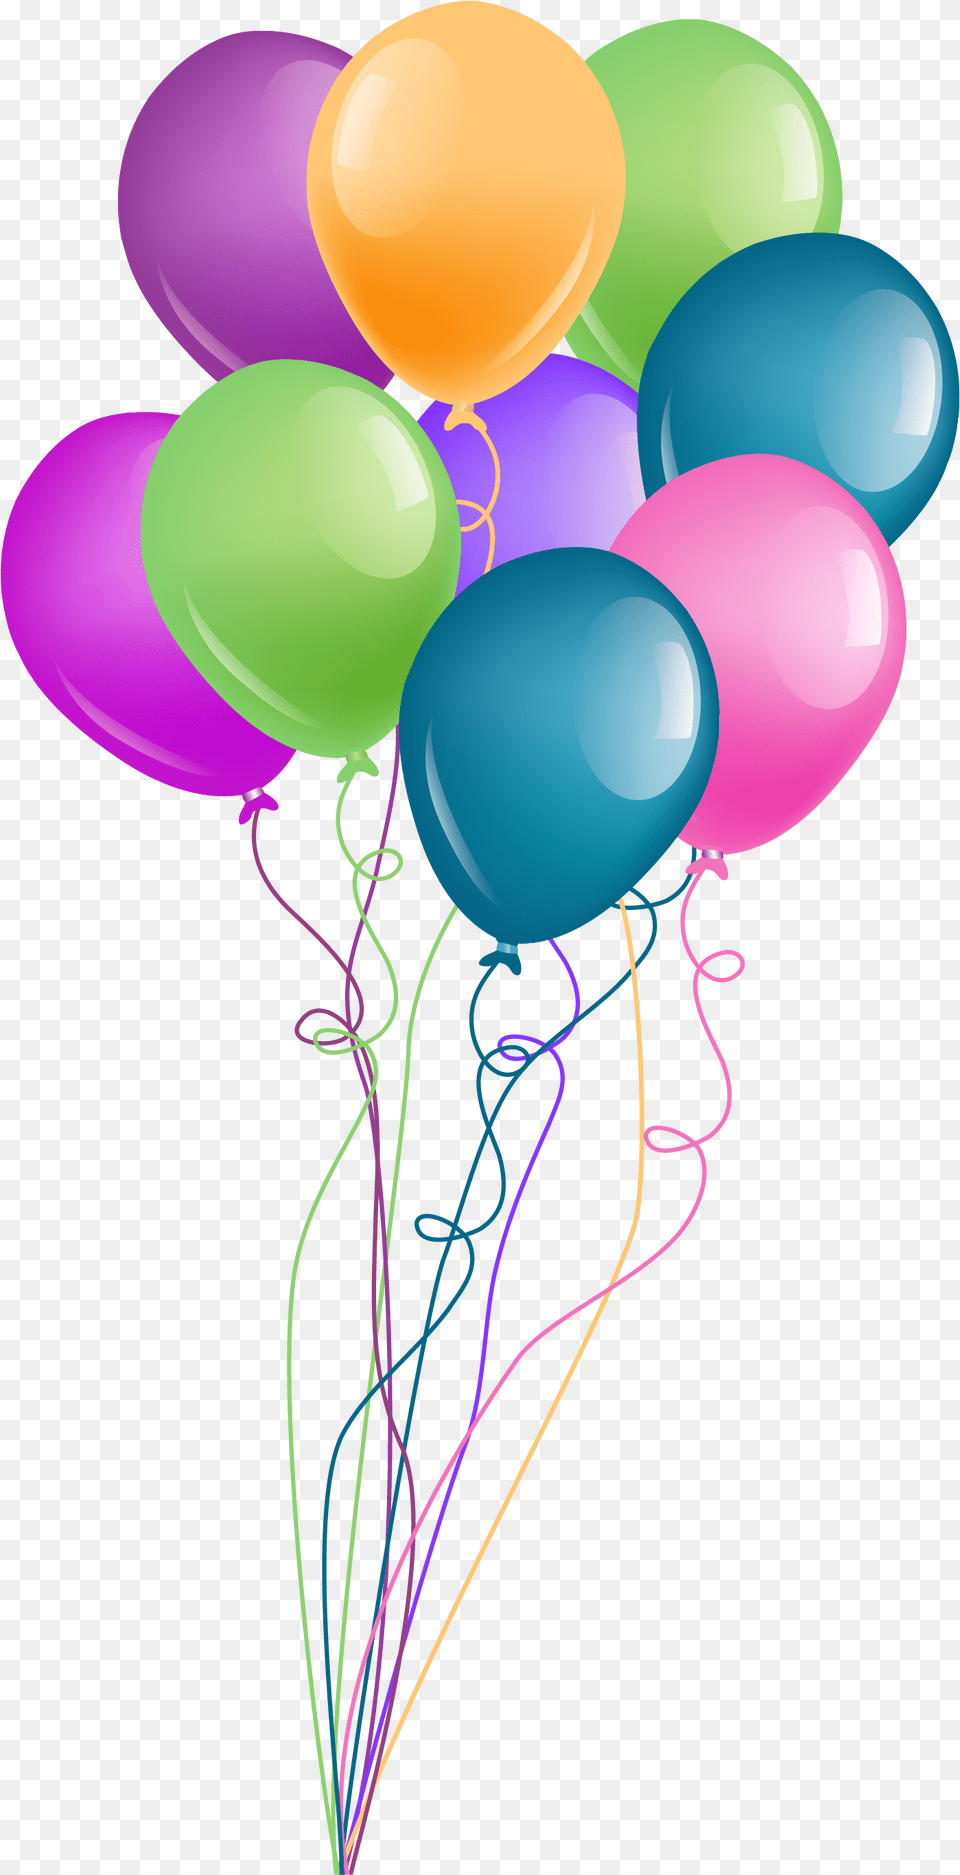 Library Of Balloon Dog Black And White Files Happy Birthday Hd Free Transparent Png